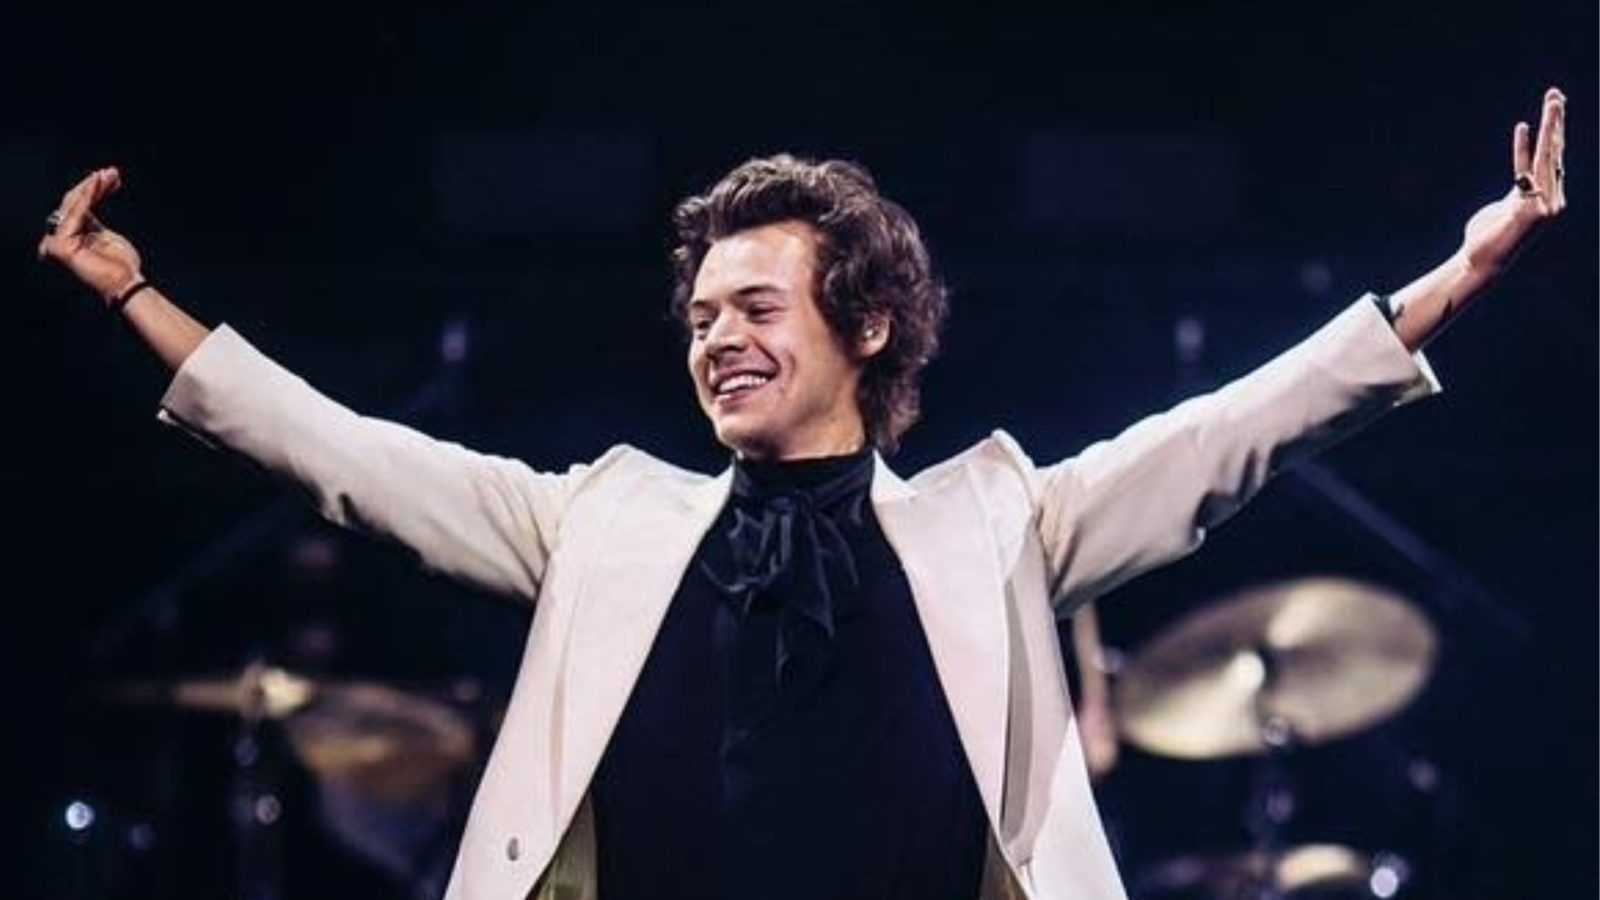 Harry Styles’ new album ‘Harry’s House’ to release this May